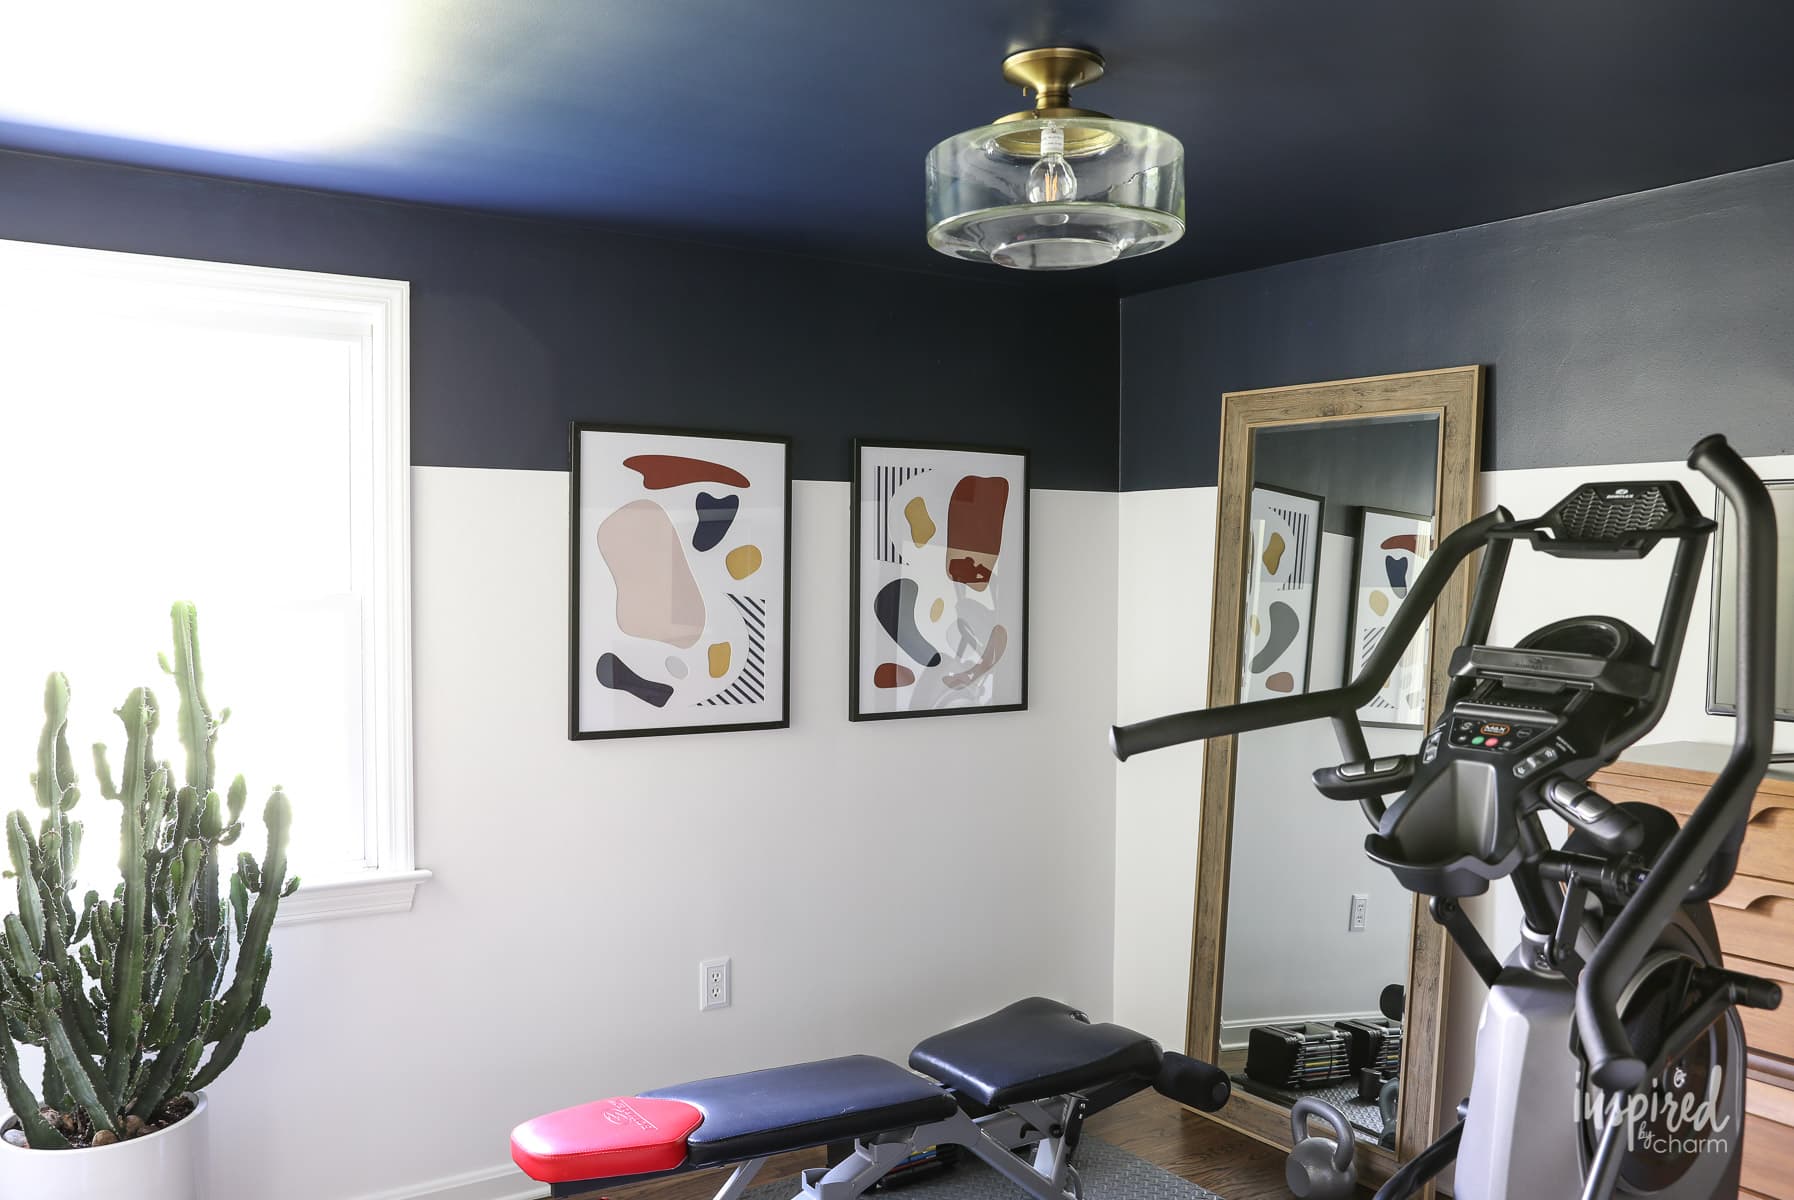 Sherwin-Williams Color of the Year Naval Two-Day Makeover #makeover #sherwinwilliams #coloroftheyear #navel #homegym #beforeandafter #paint #navy